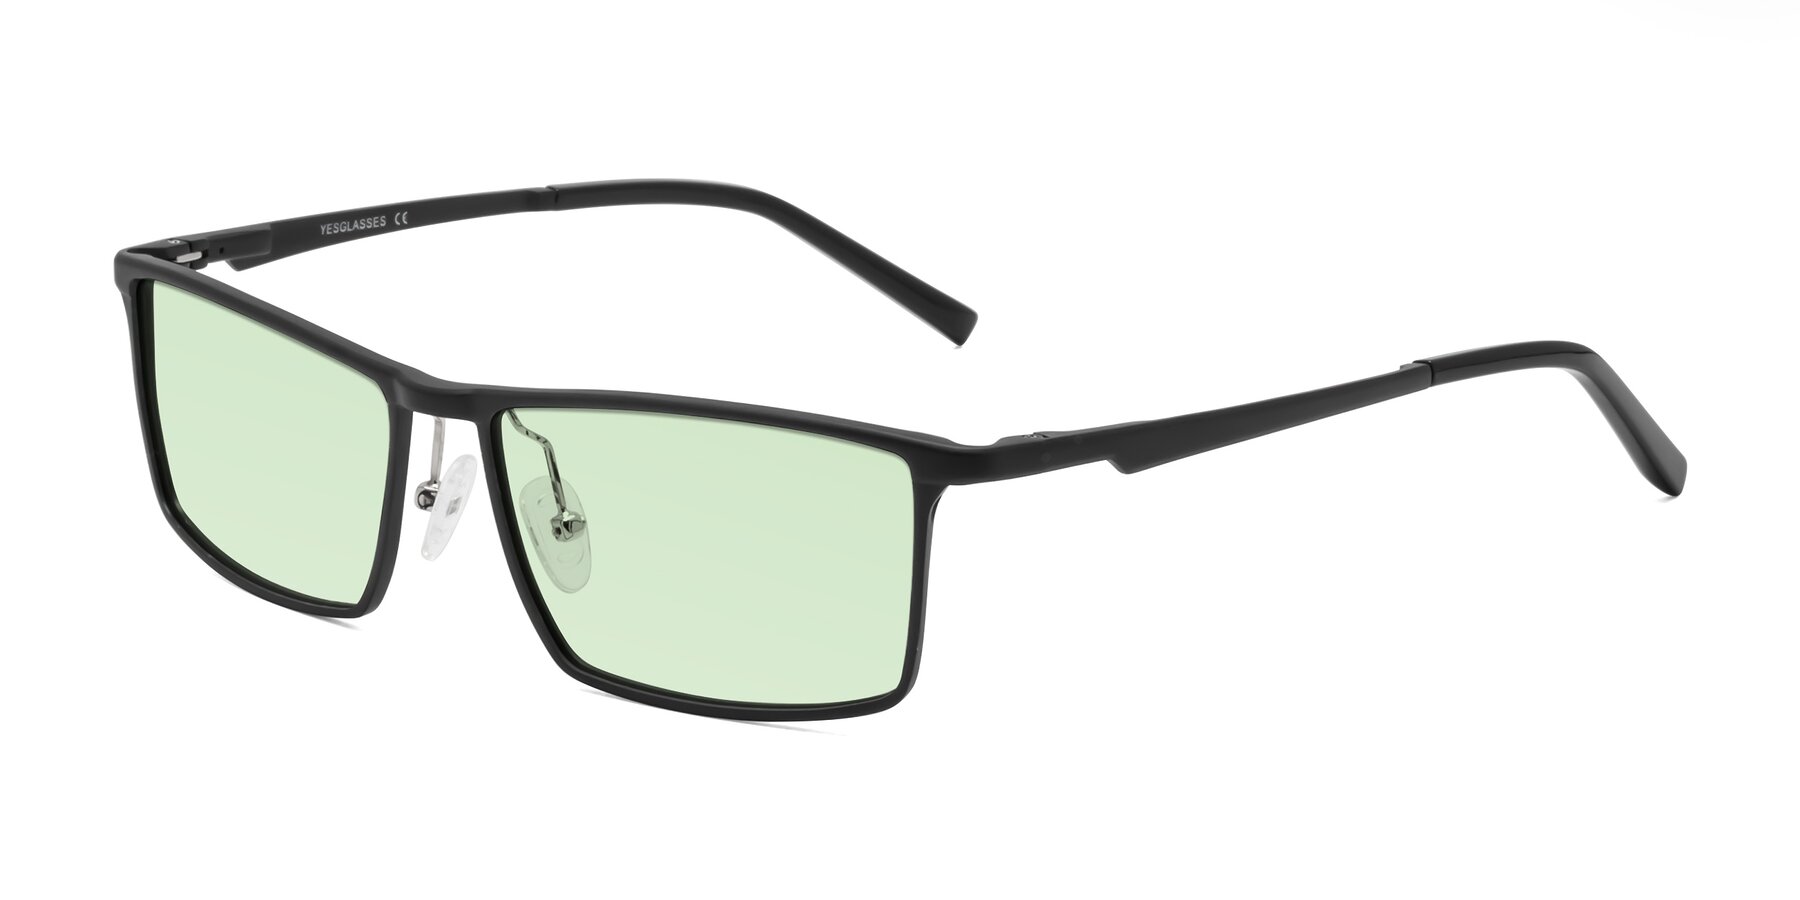 Angle of CX6330 in Black with Light Green Tinted Lenses